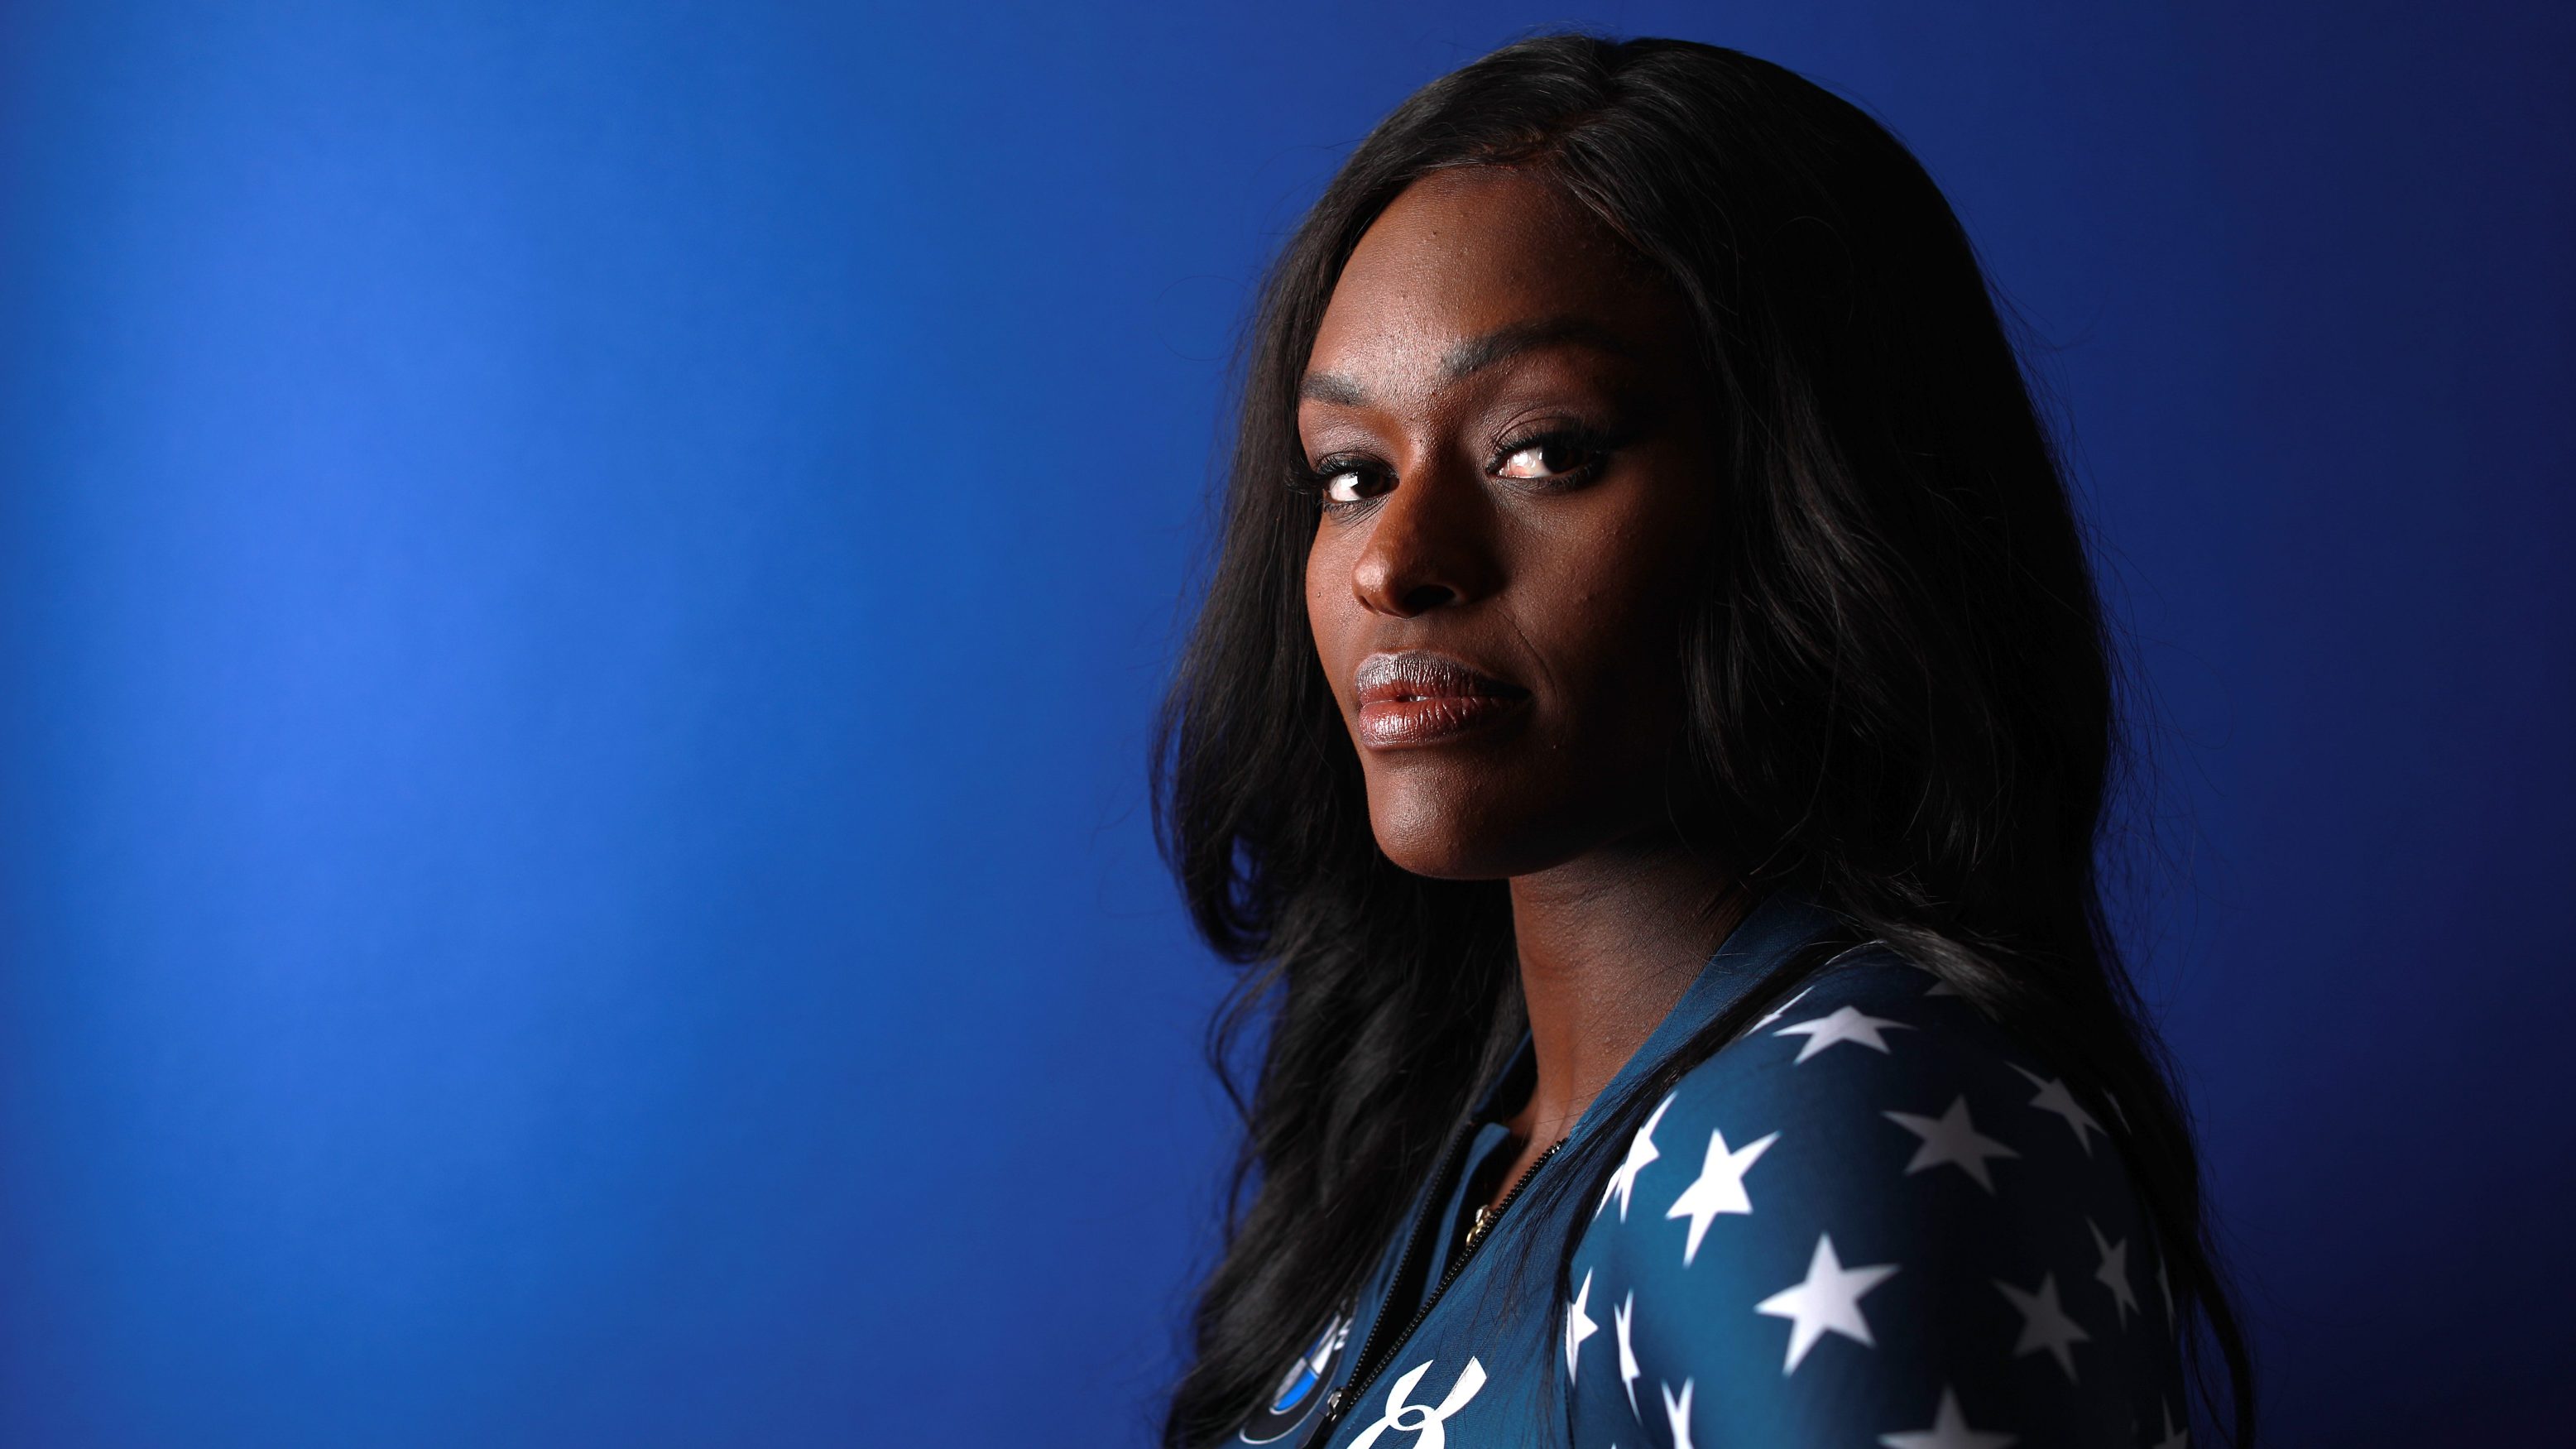 Bobsledder Aja Evans poses for a portrait during the Team USA Media Summit ahead of the PyeongChang 2018 Olympic Winter Games on September 25, 2017 in Park City, Utah.